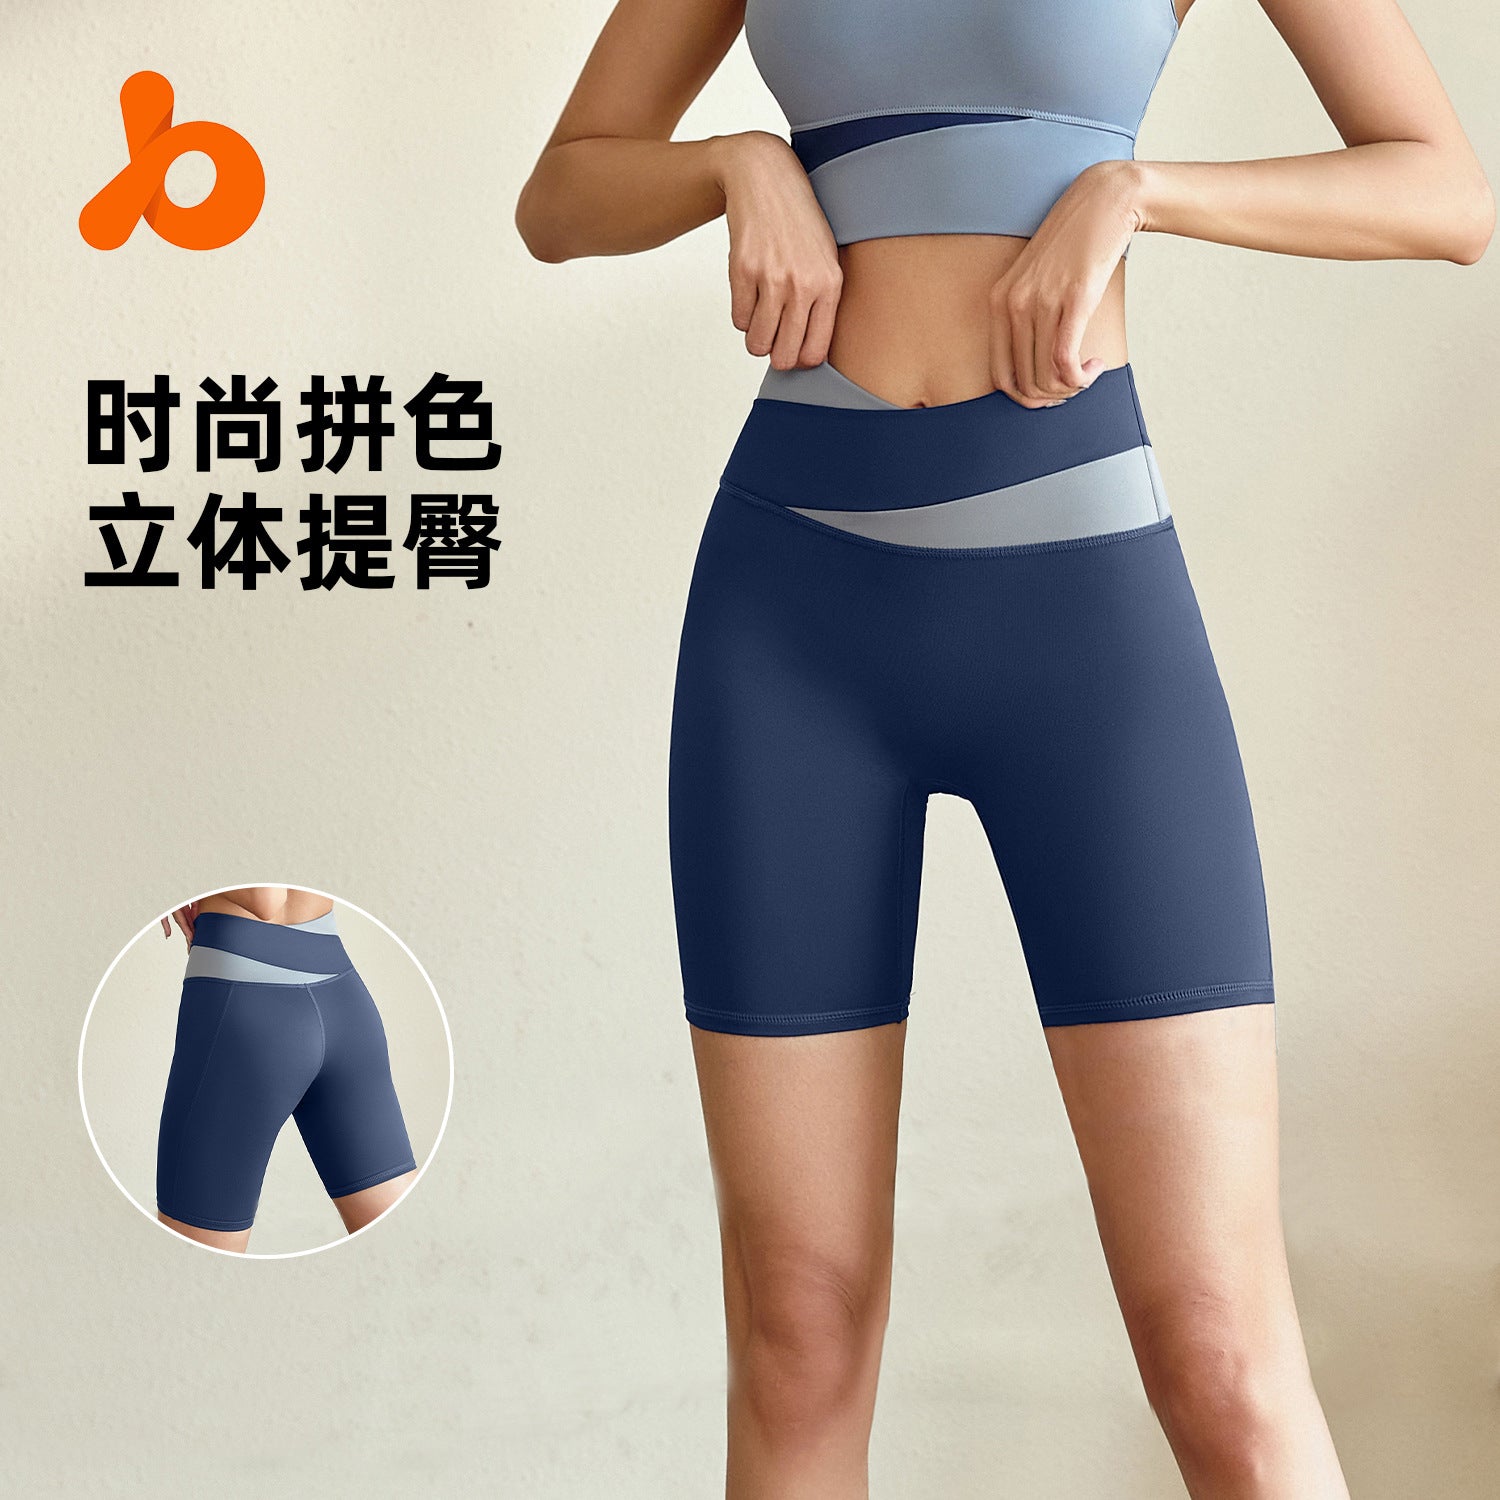 Juyitang color matching yoga pants women&#039;s high waist hip five-point pants seamless peach pants summer sports exposure-proof shorts.